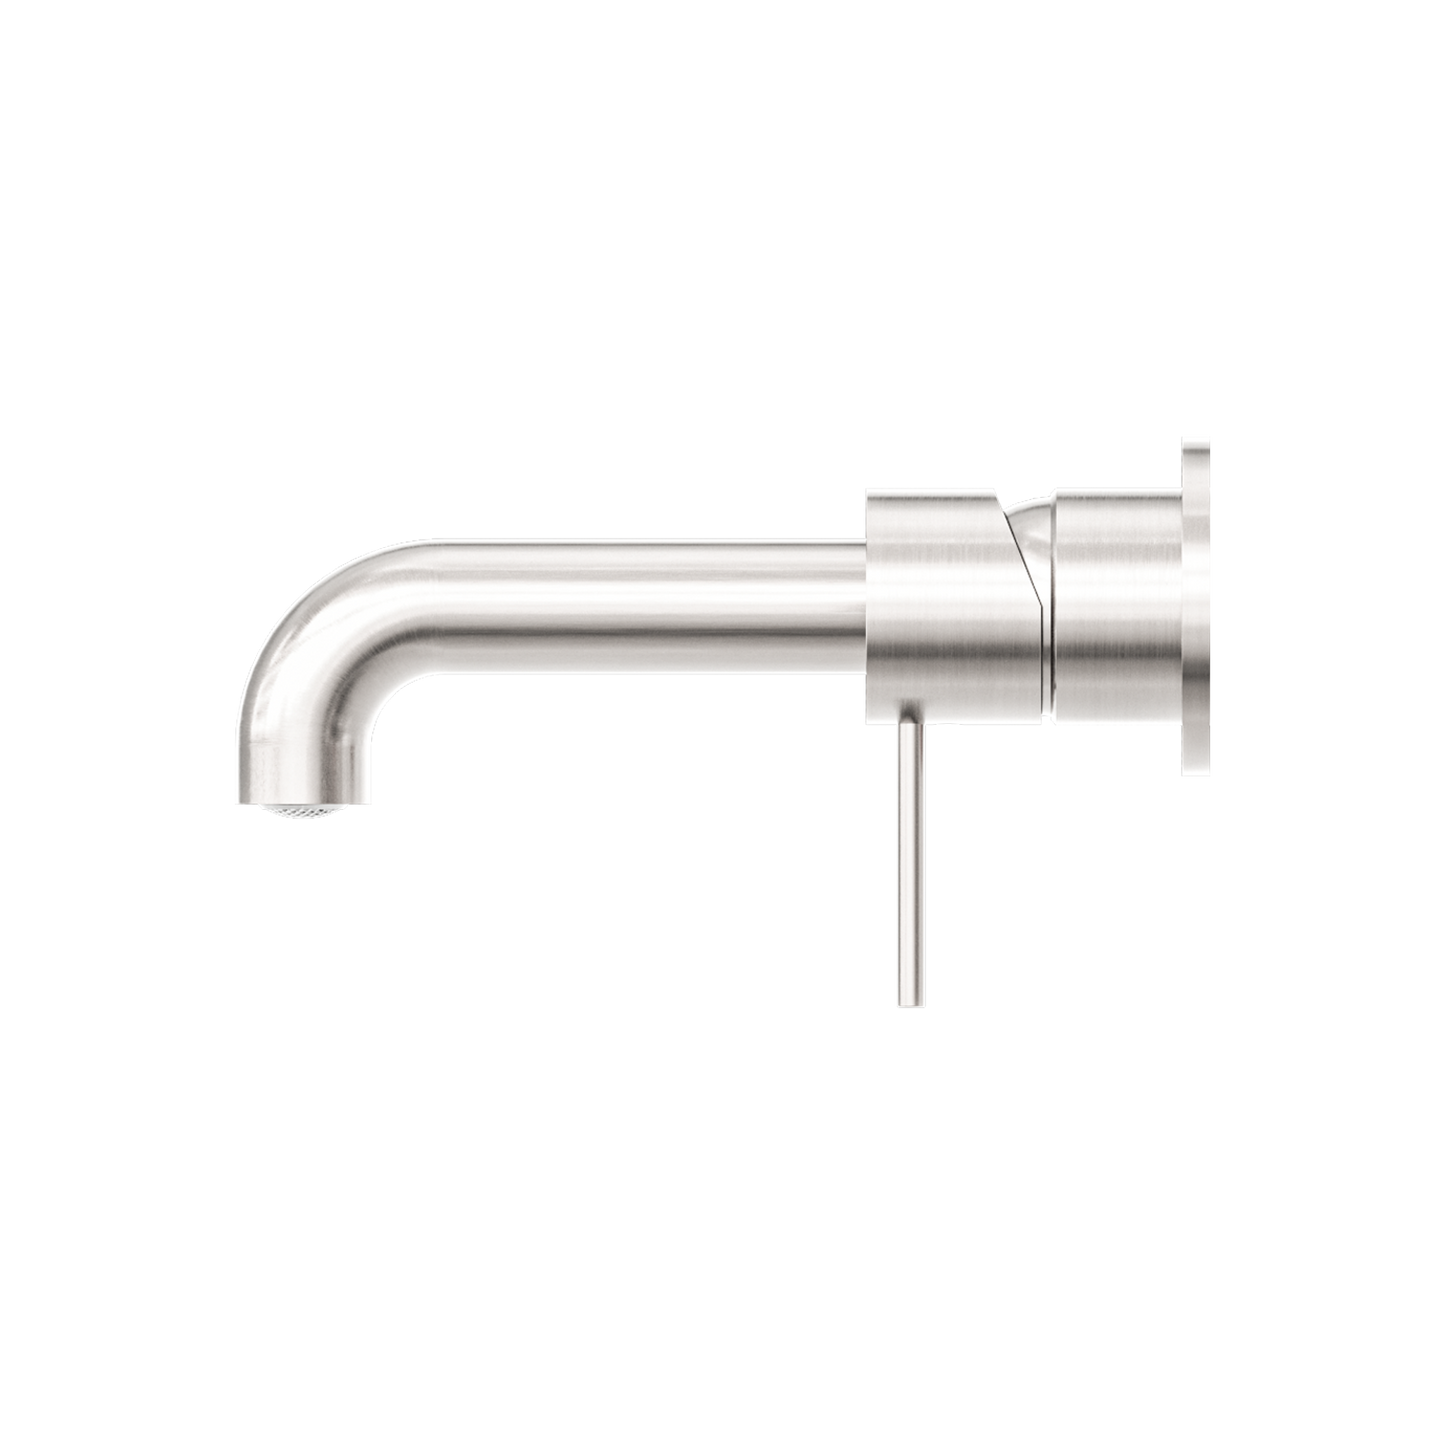 Mecca Brushed Nickel Wall Basin Mixer (Separate Back Plate）